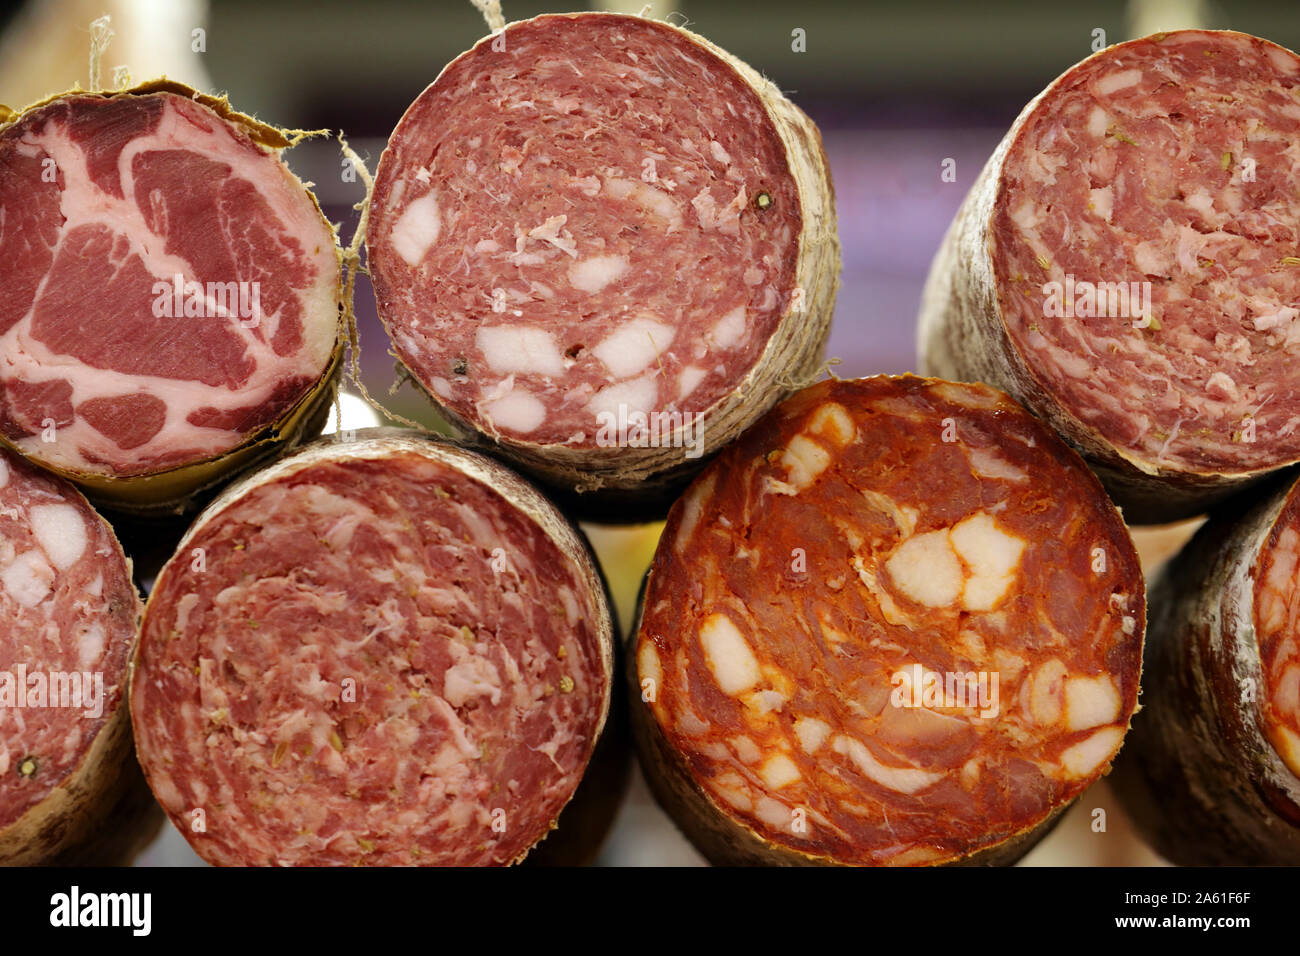 28 and Alamy - images - hi-res photography Page at stock Salami market the